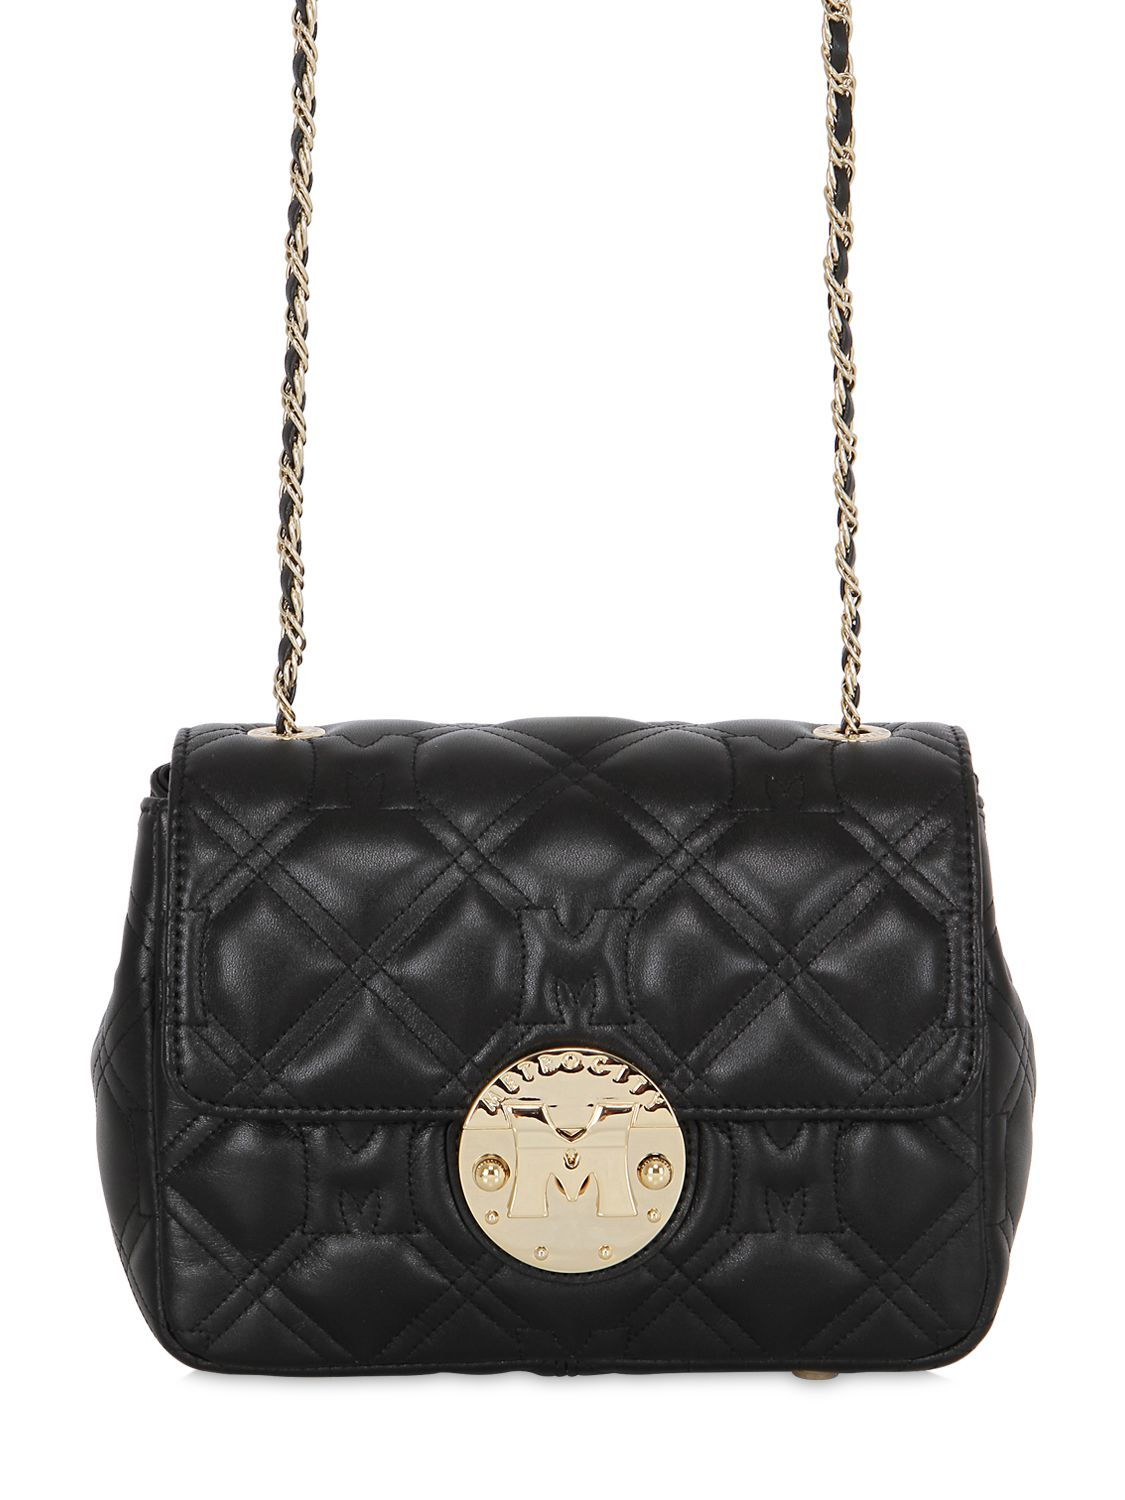 Metrocity Quilted Leather Shoulder Bag in Black - Save 31% | Lyst